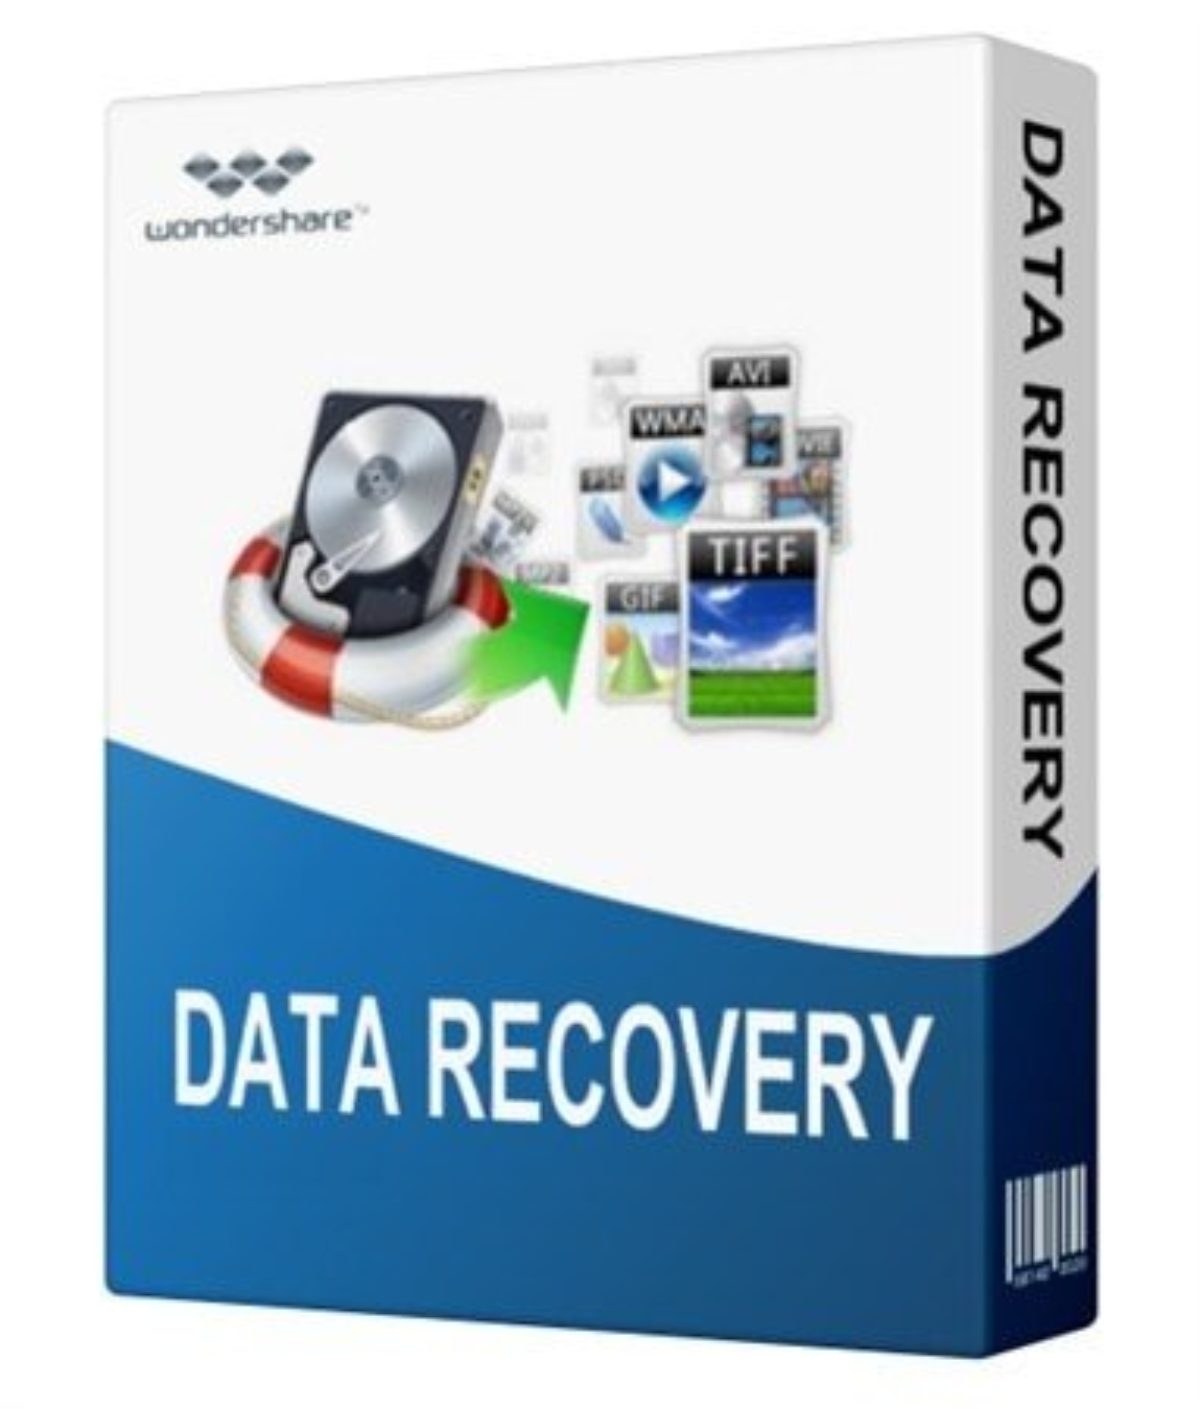 is wondershare data recovery safe